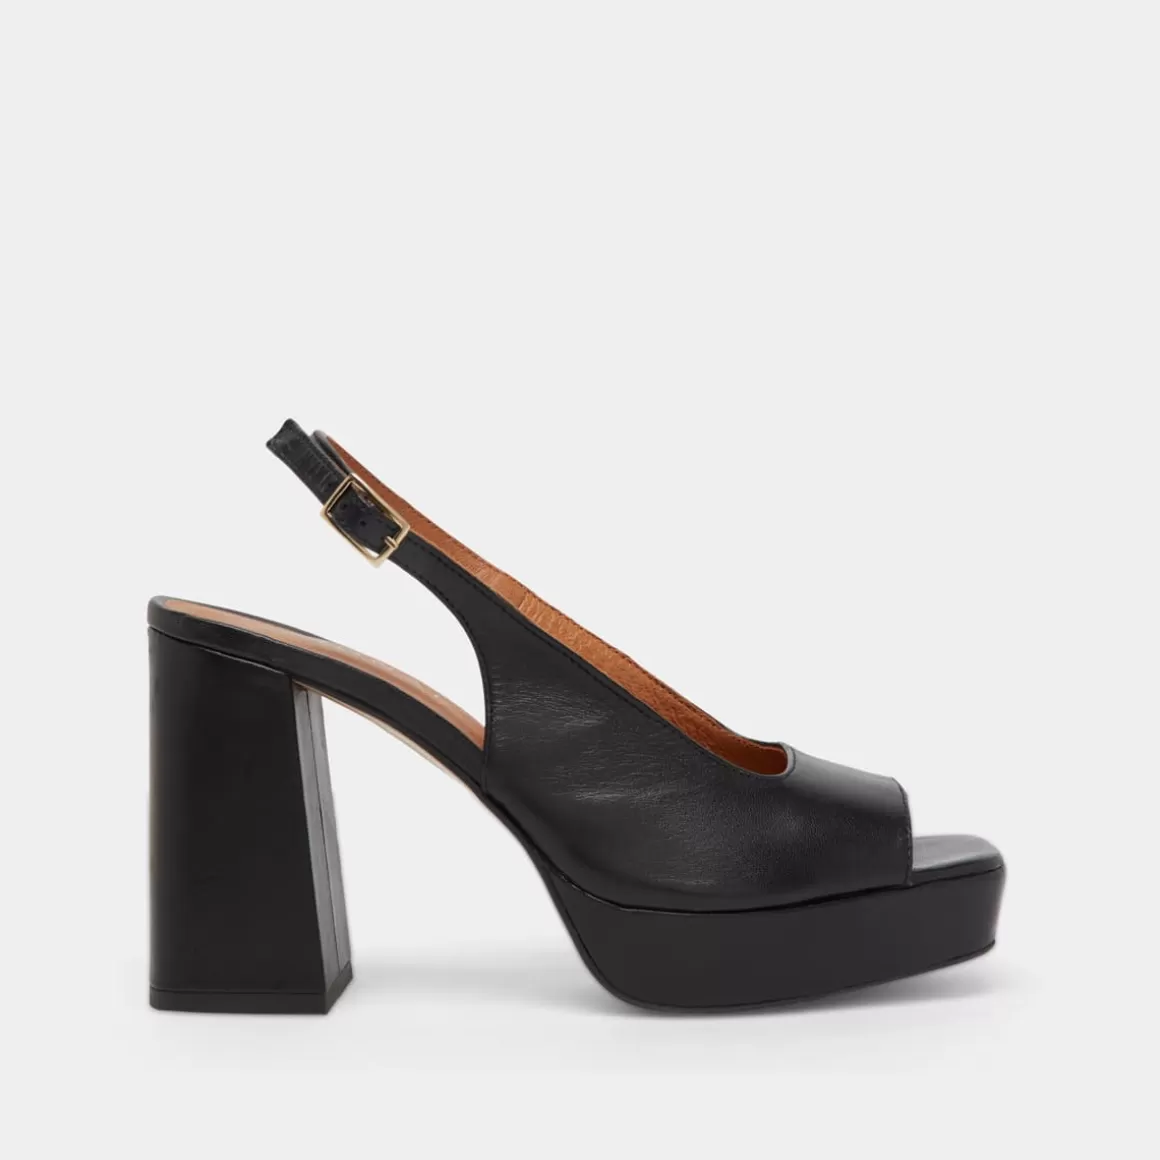 Square toe pumps with high heels<Jonak New